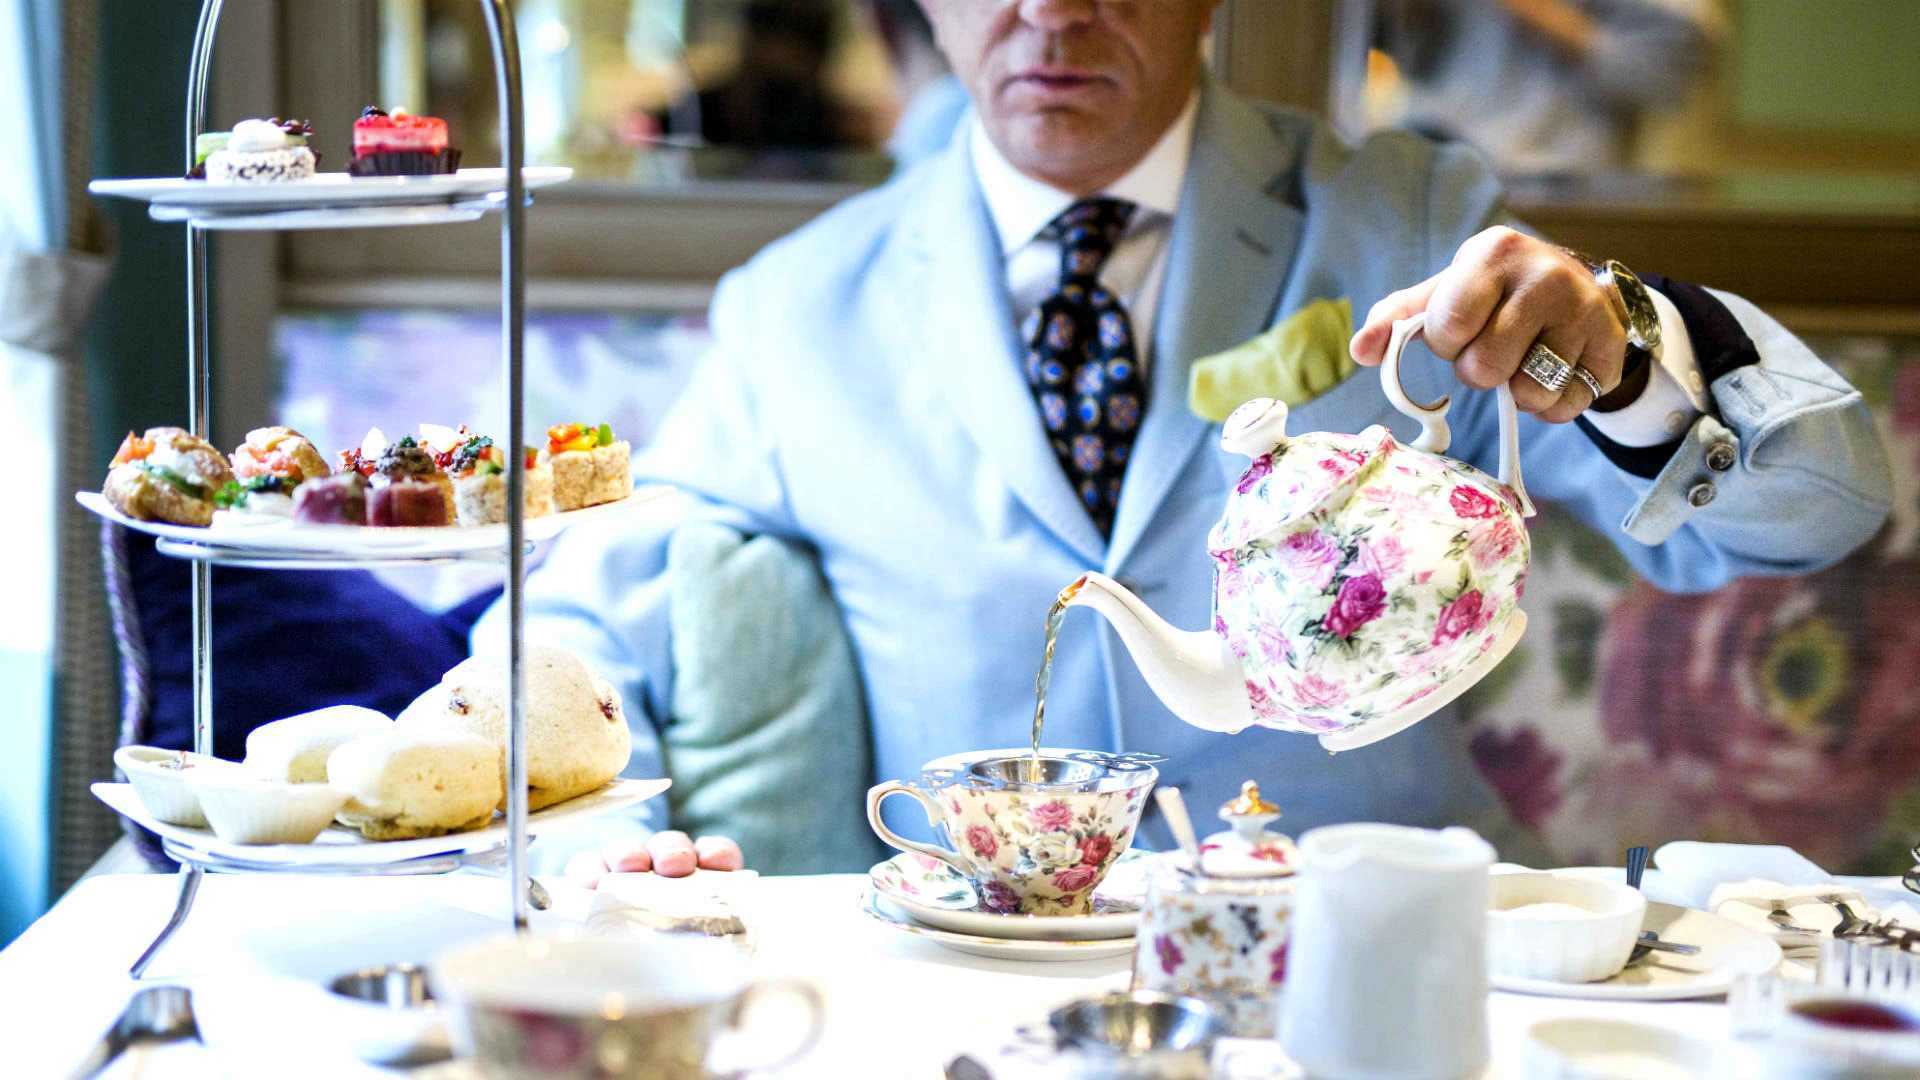 Afternoon tea and high tea in Toronto | High tea at the Windsor Arms hotel